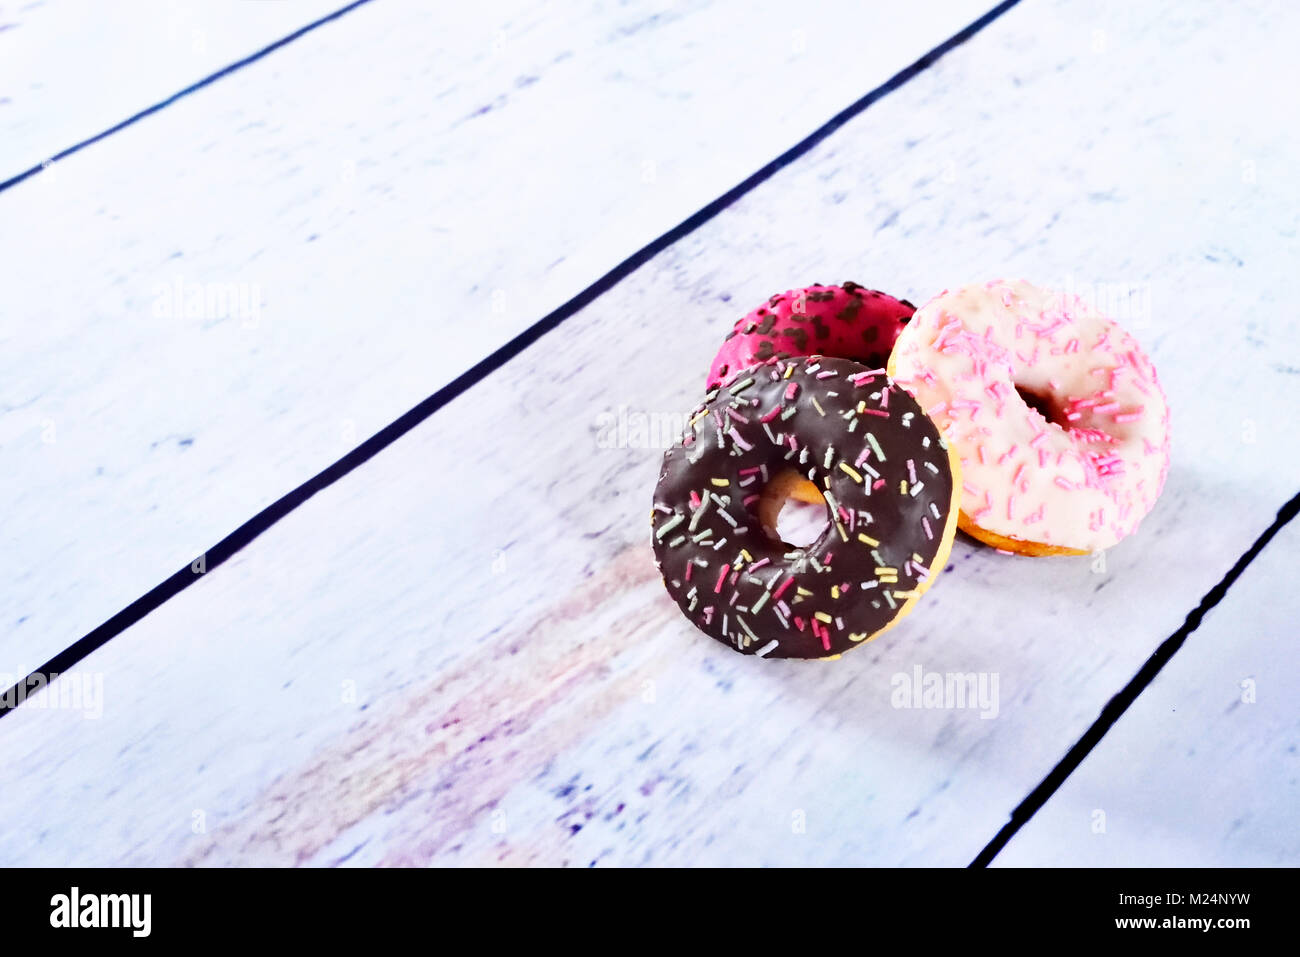 delicious donuts with glaze or icing and sprinkles. variation of fresh donuts on a white wooden table. Arrangement with copy space. Stock Photo